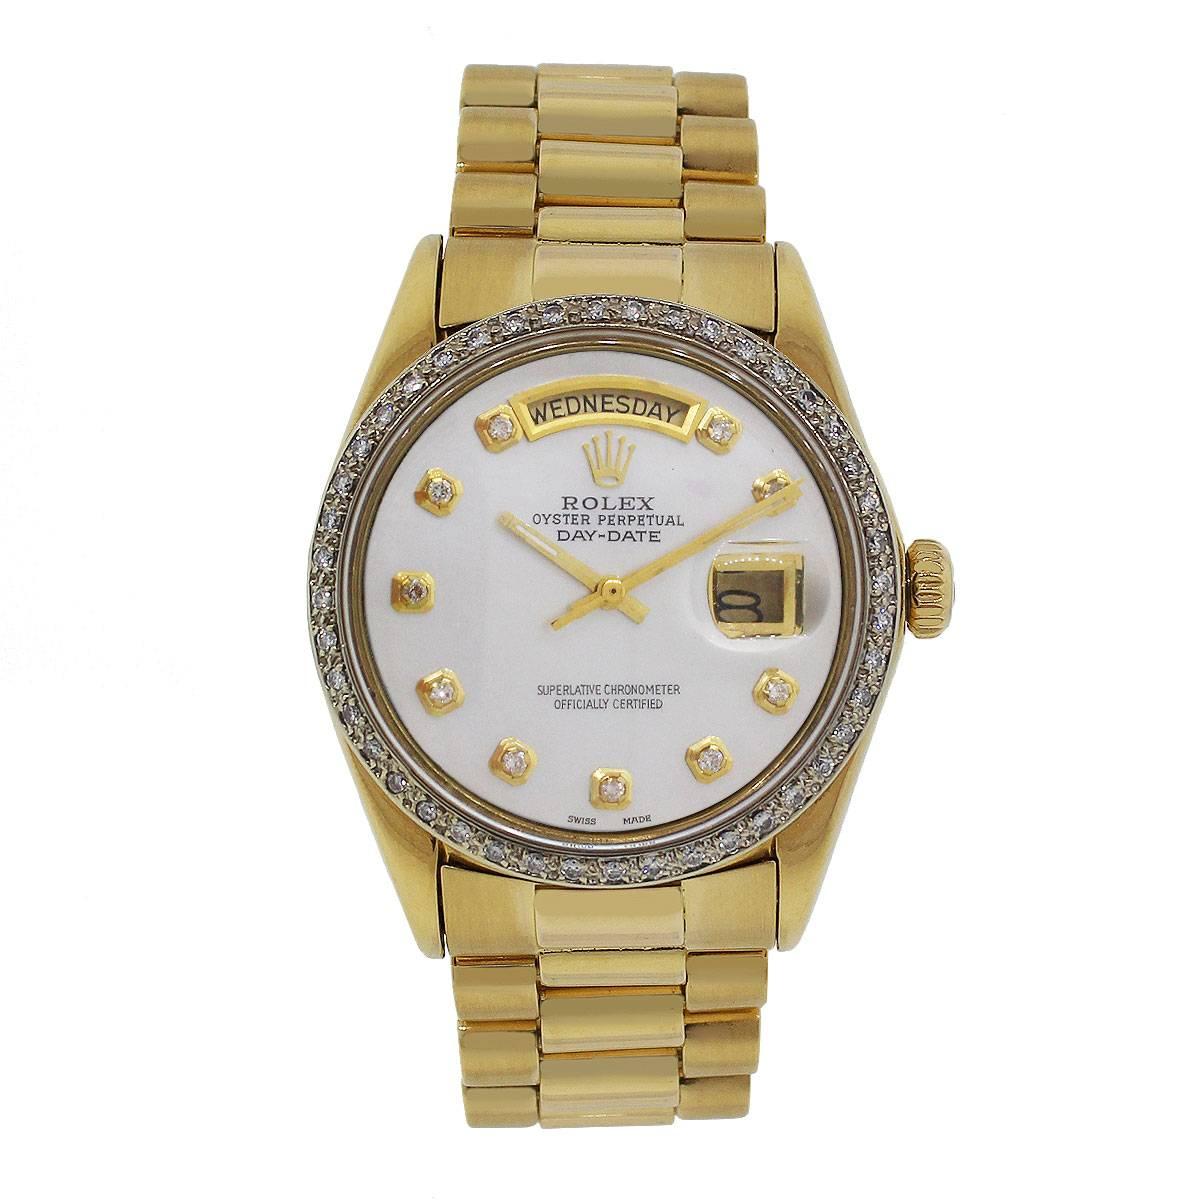 Brand: Rolex
MPN: 18038
Model: Day-Date
Case Material: 18k Yellow Gold
Case Diameter: 36mm
Crystal: Plastic
Bezel: 18k yellow gold with diamonds
Dial: Mother of pearl dial with diamonds. Date is located at 3 o’ clock
Bracelet: Presidential